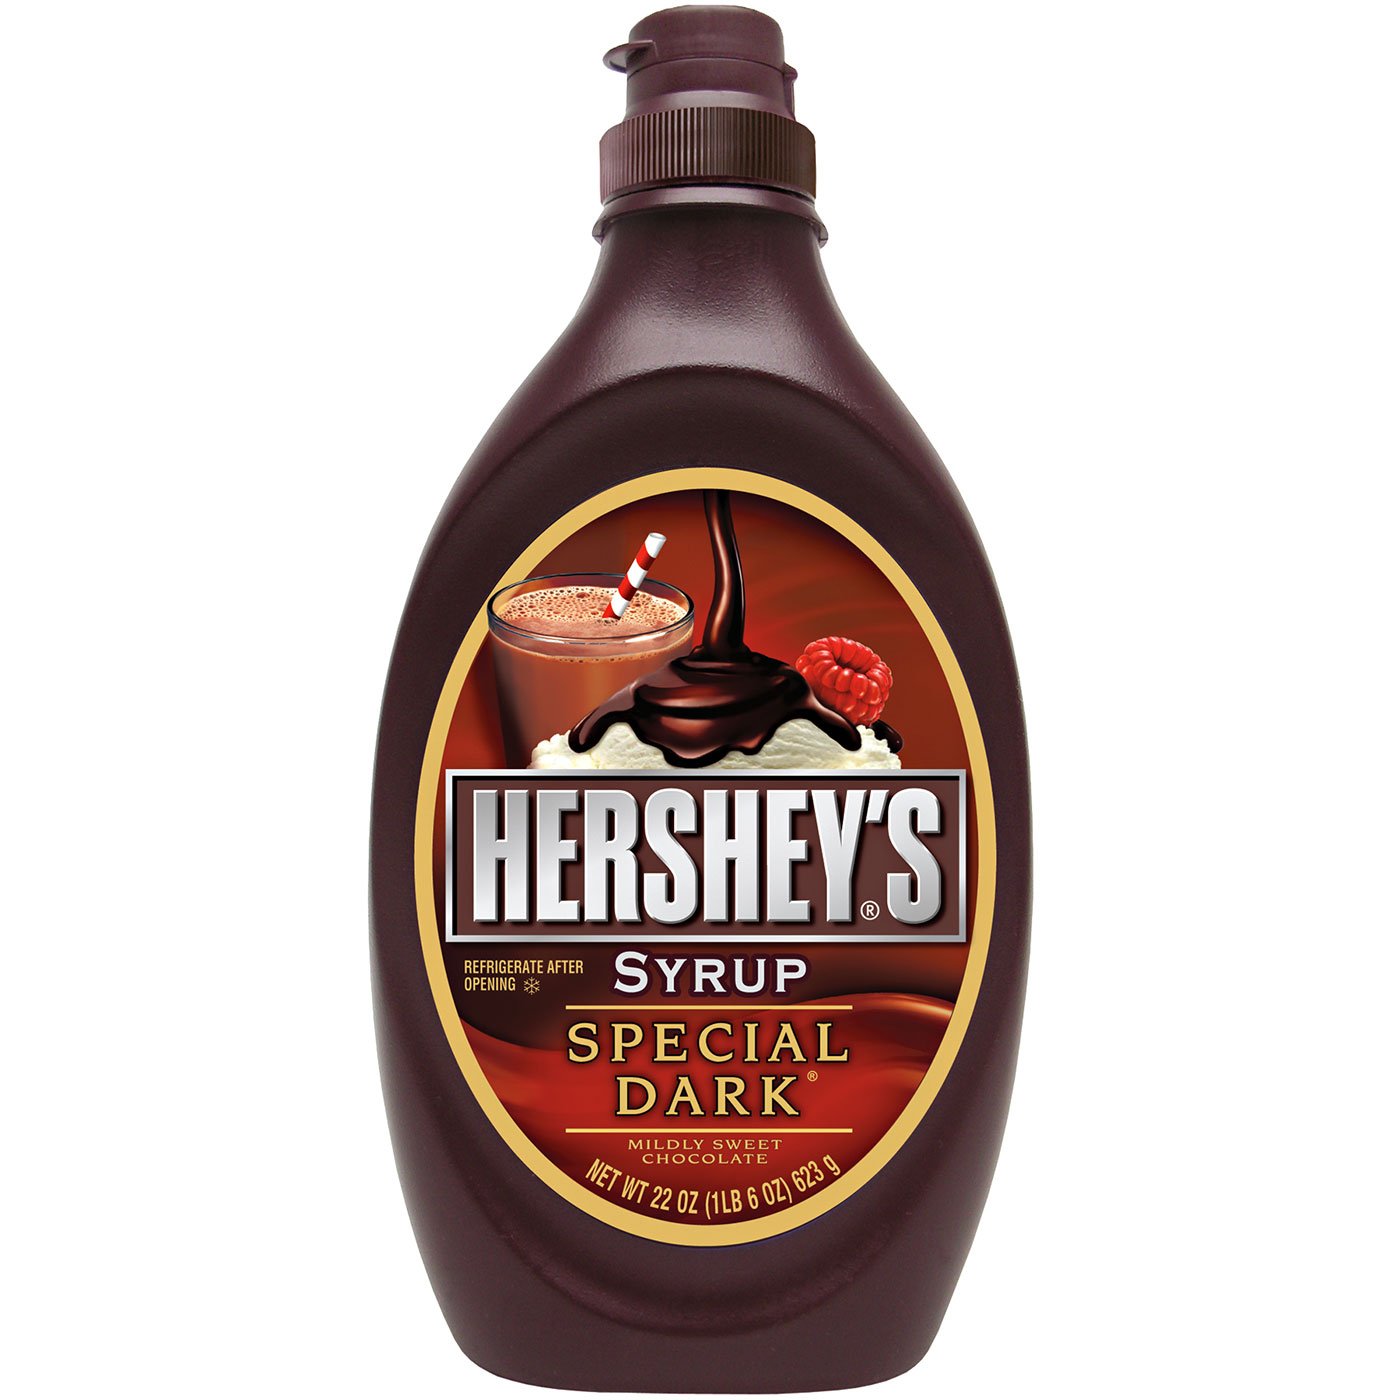 Hershey's Special Dark Syrup Image